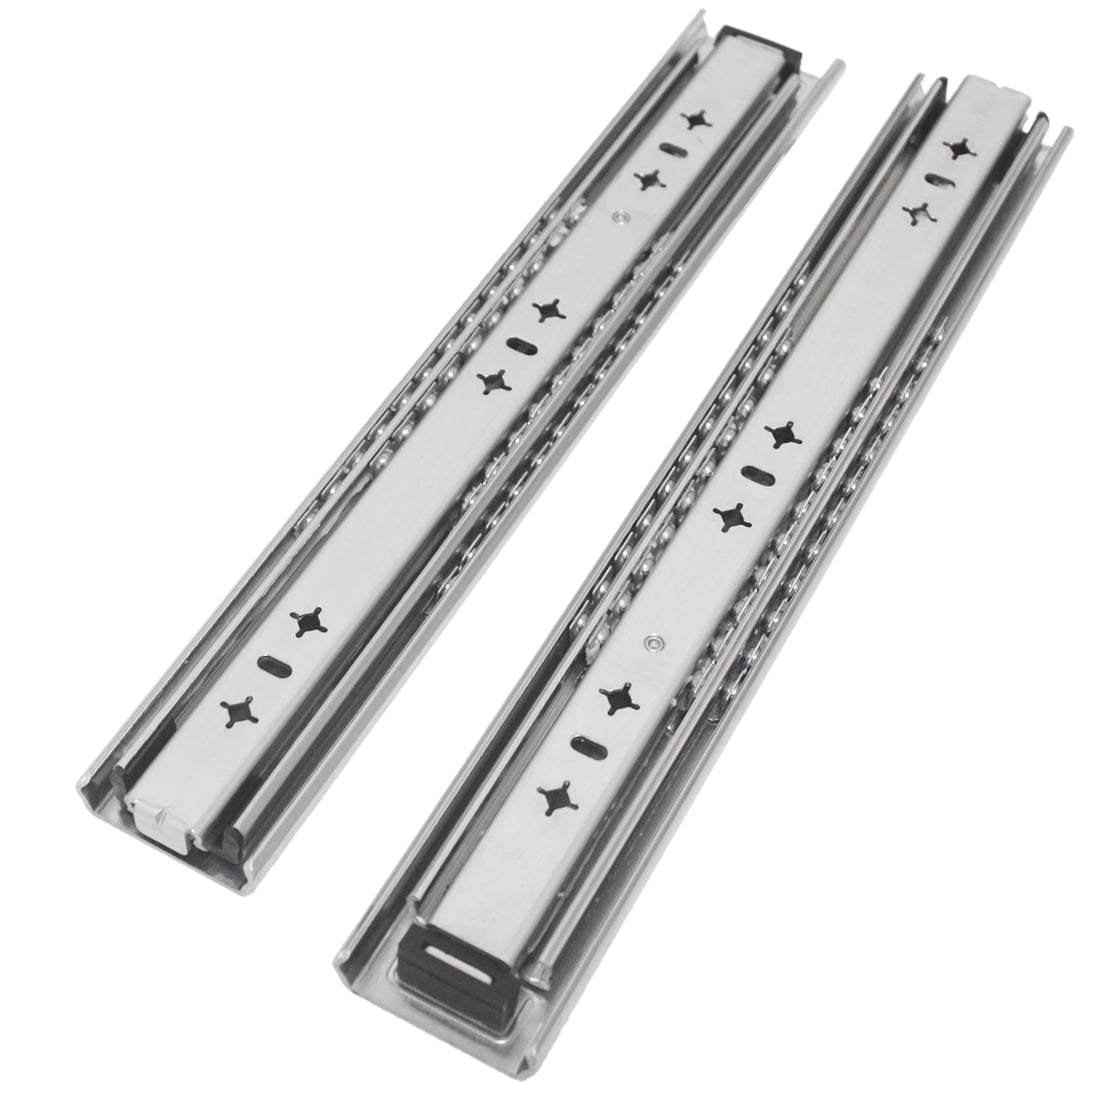 WLYW 1-Pair Bearing Slides Silver Cabinet Drawer Runners,Soft Close Drawer Slides 800mm,120kg Load Capacity Ball Bearing Side Mounting,Heavy Duty Slide Full Extension,Quiet and No Noise